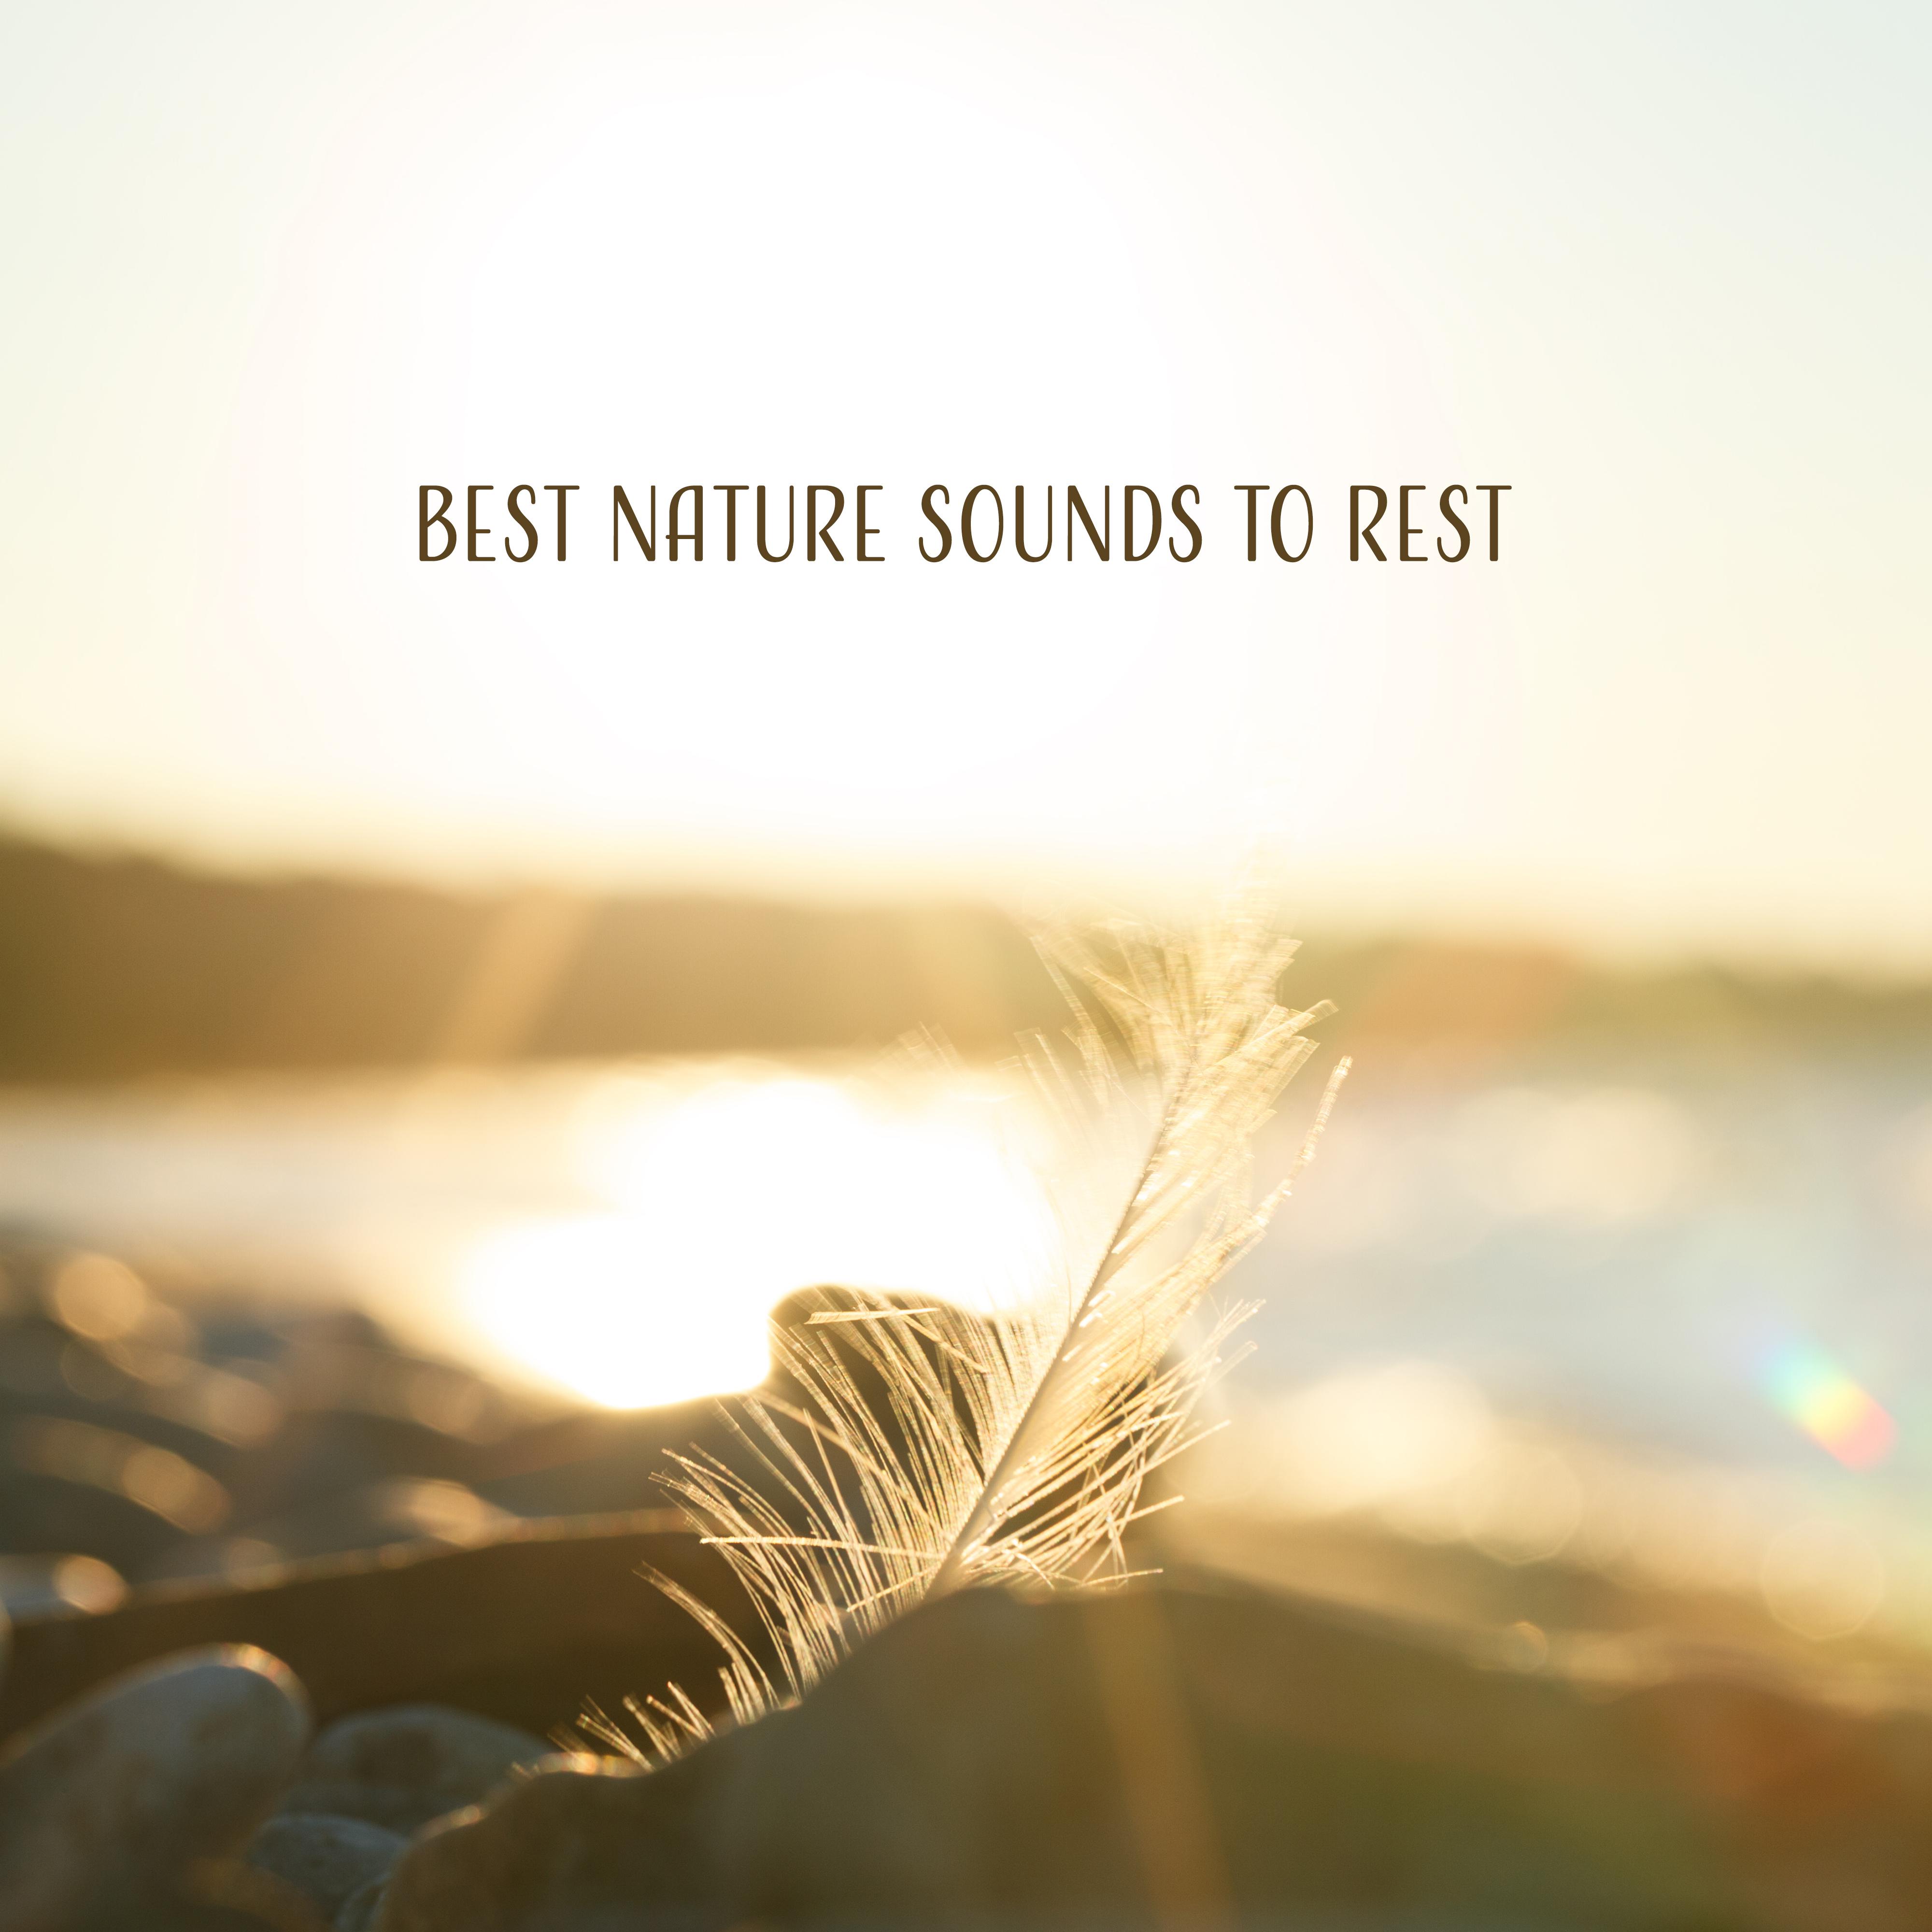 Best Nature Sounds to Rest  Pure Relaxation, Sounds of Forest, Deep Meditation, Peaceful Waves